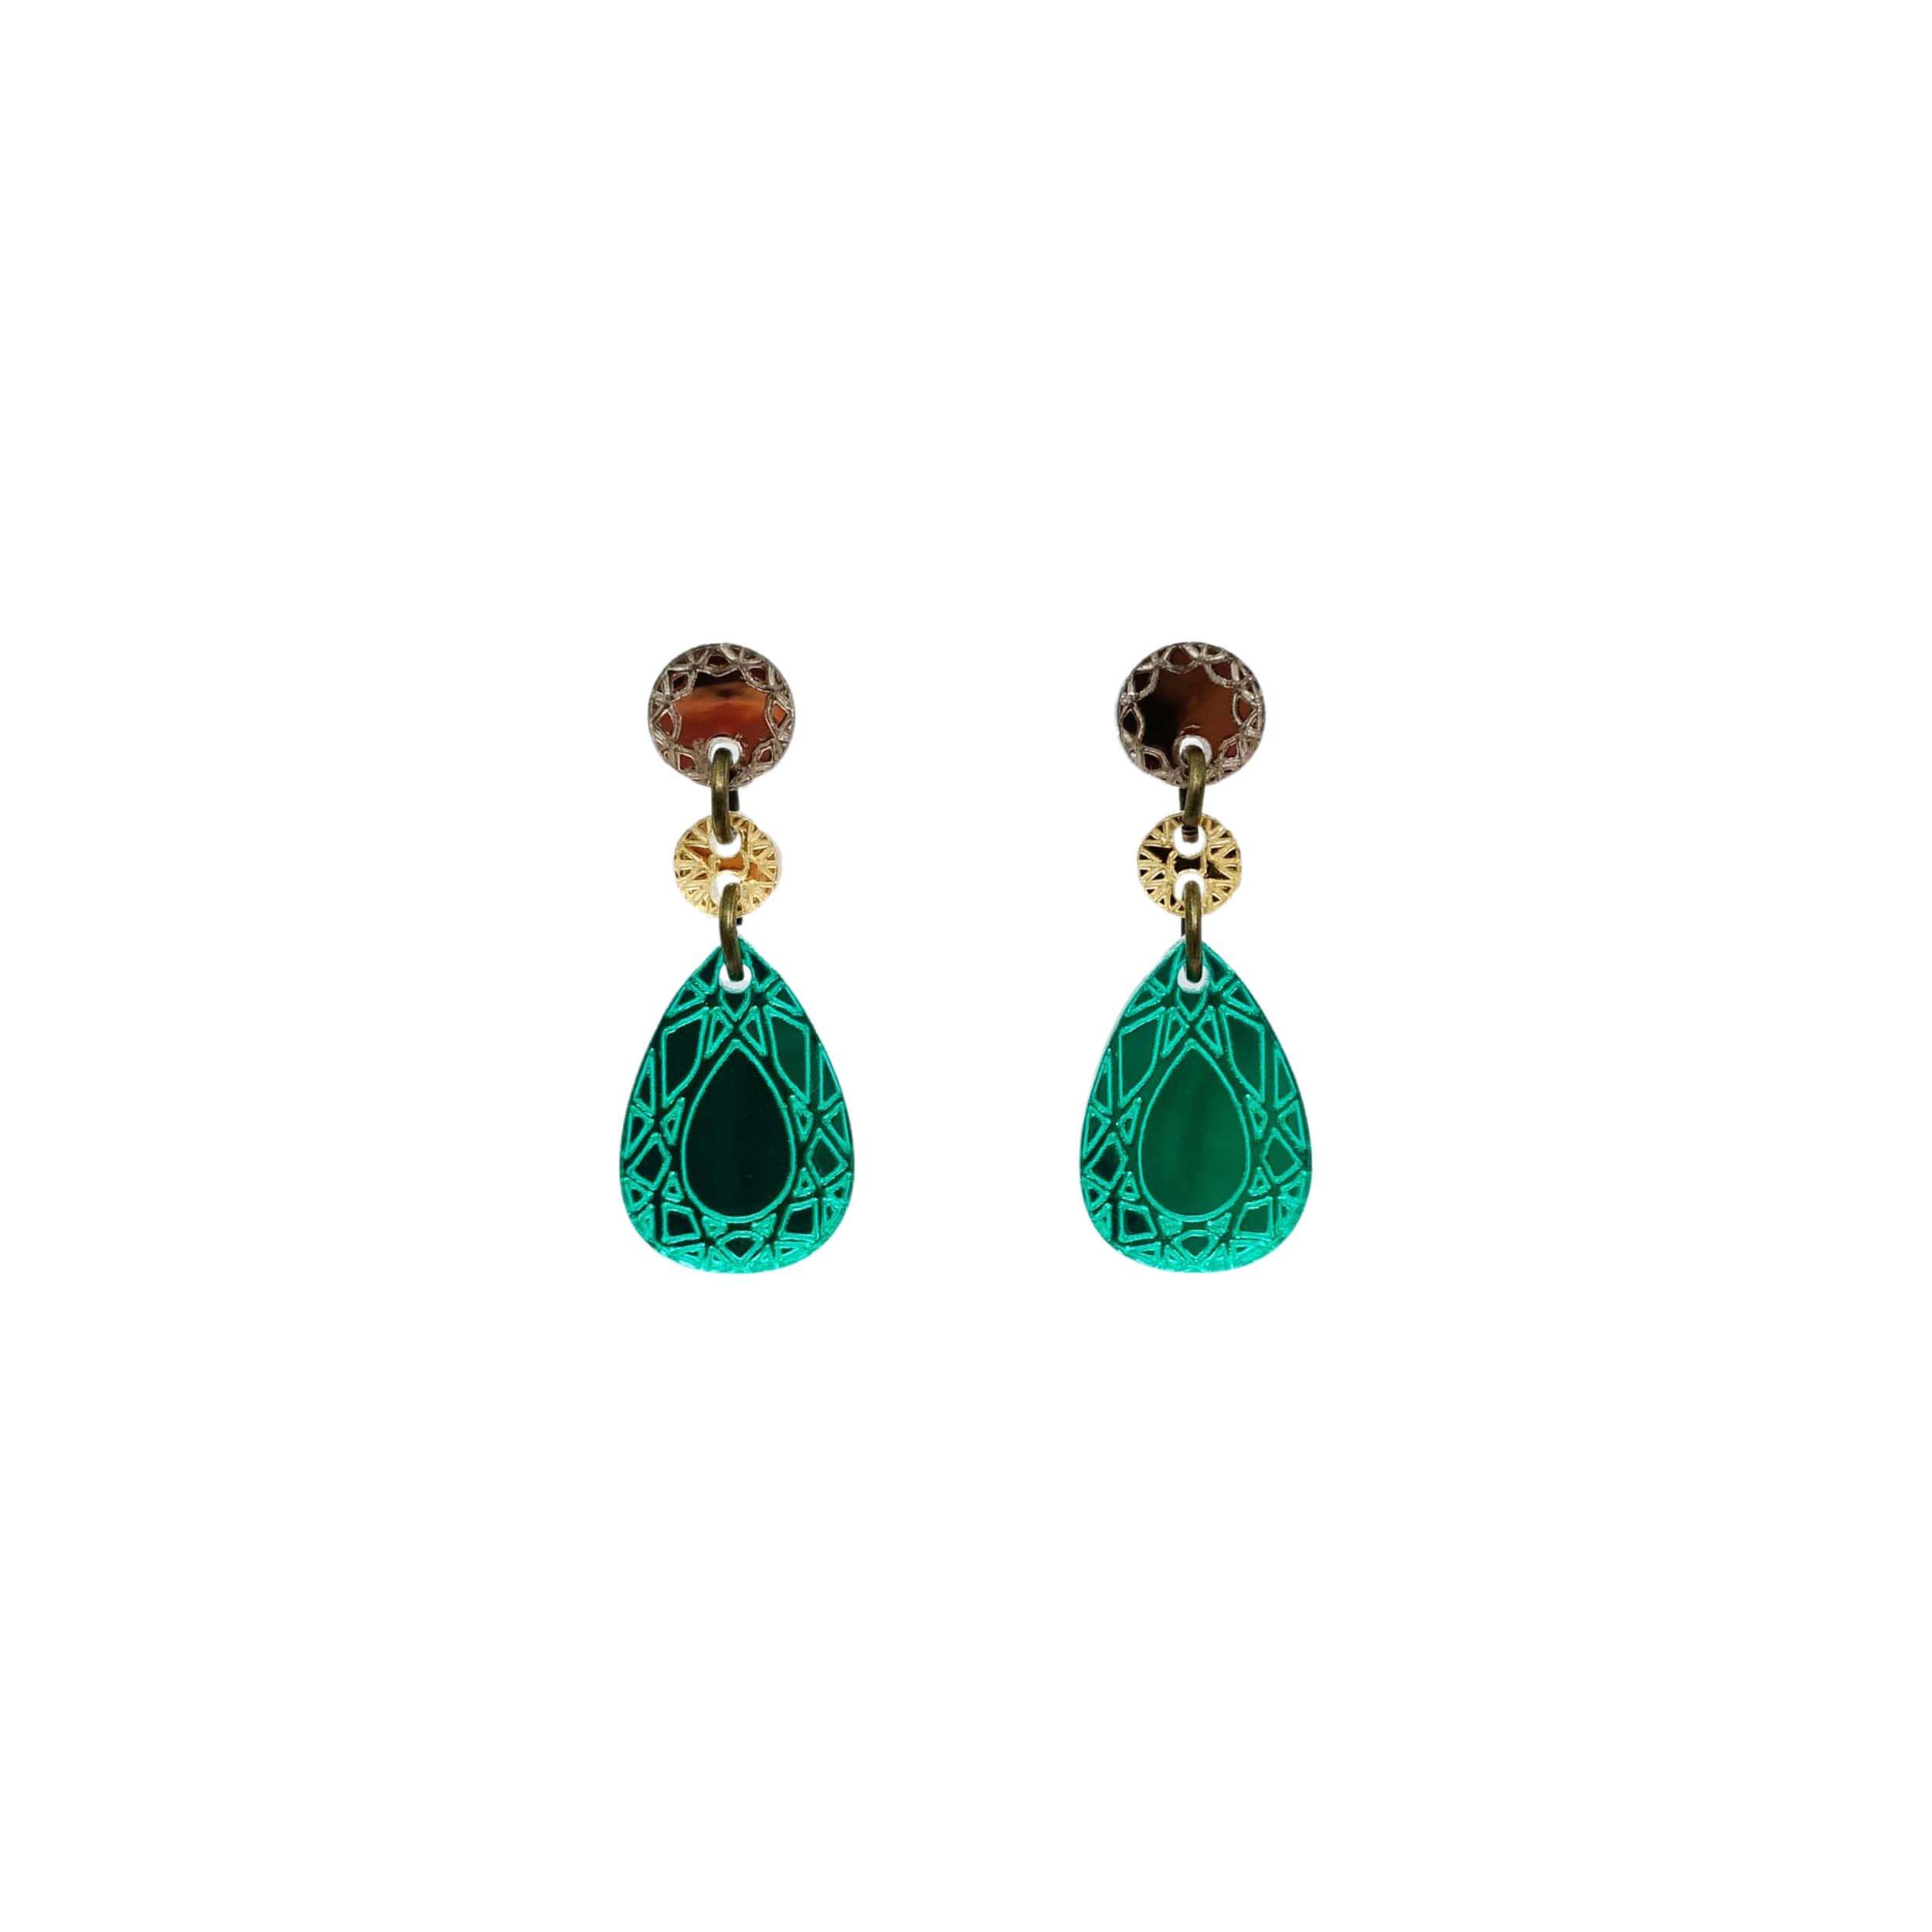 Belle Époque french drop earrings in electric green. These earrings are part of the Austerity Jewels Paris-inspired collection designed by Sarah Day for Wear and Resist. 